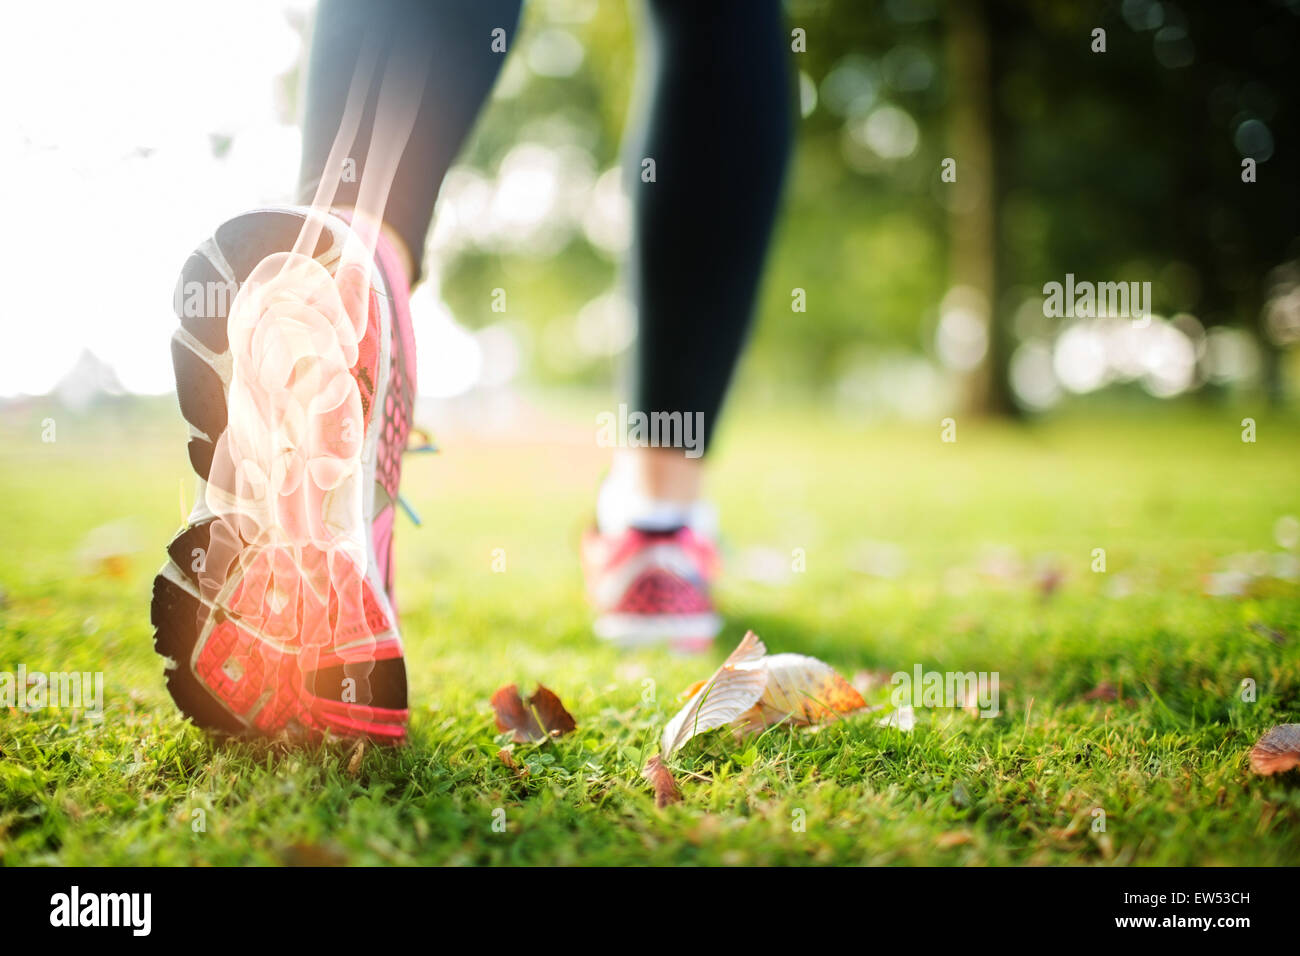 Highlighted foot bones of jogging woman Stock Photo